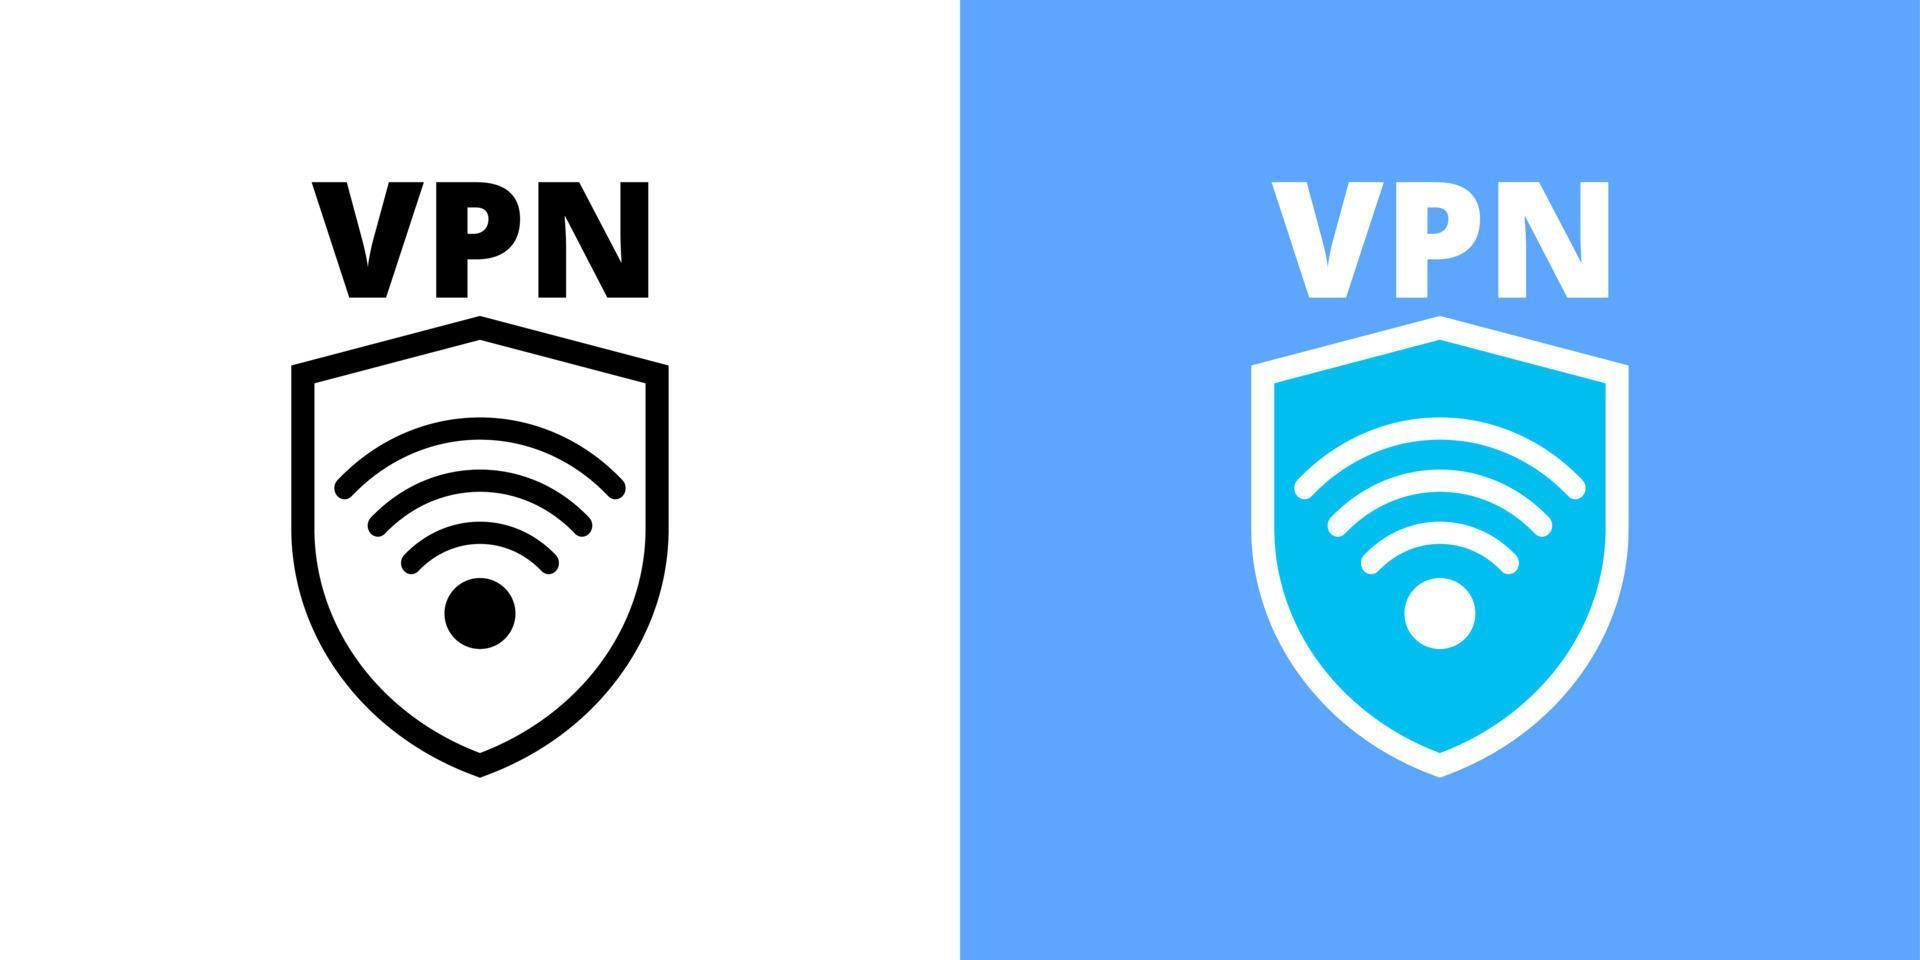 White and blue VPN logo in flat style for printing and design. Vector illustration.